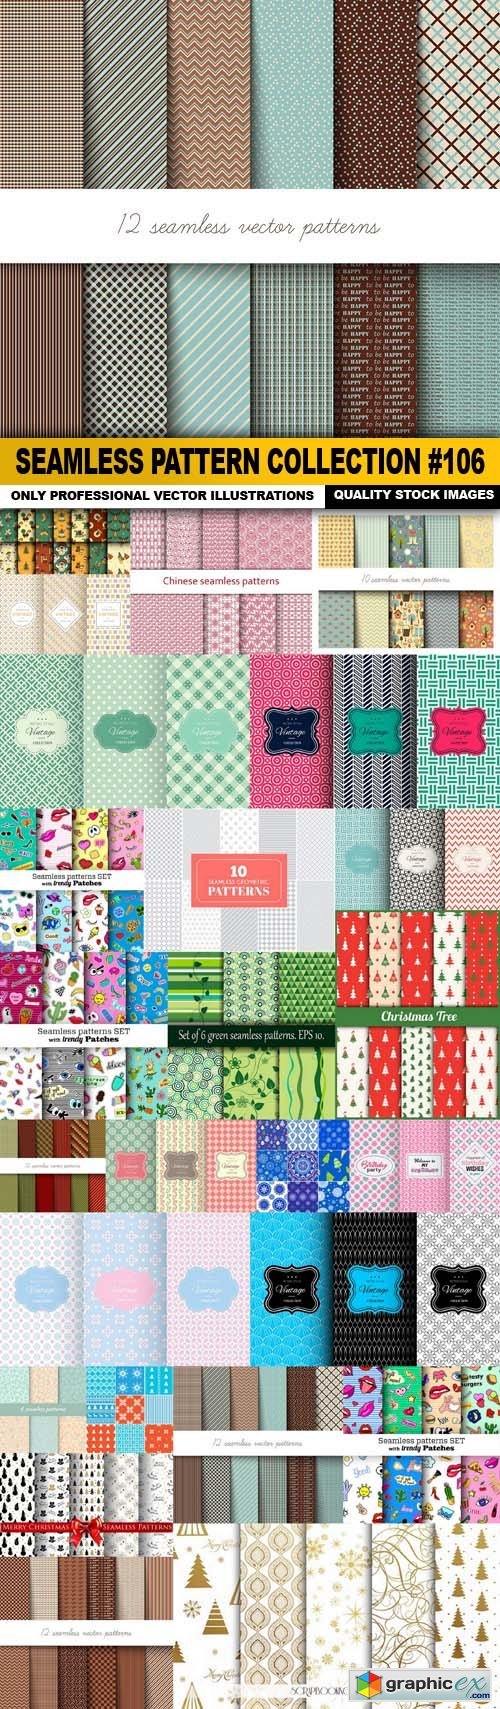 Seamless Pattern Collection #106 - 25 Vector